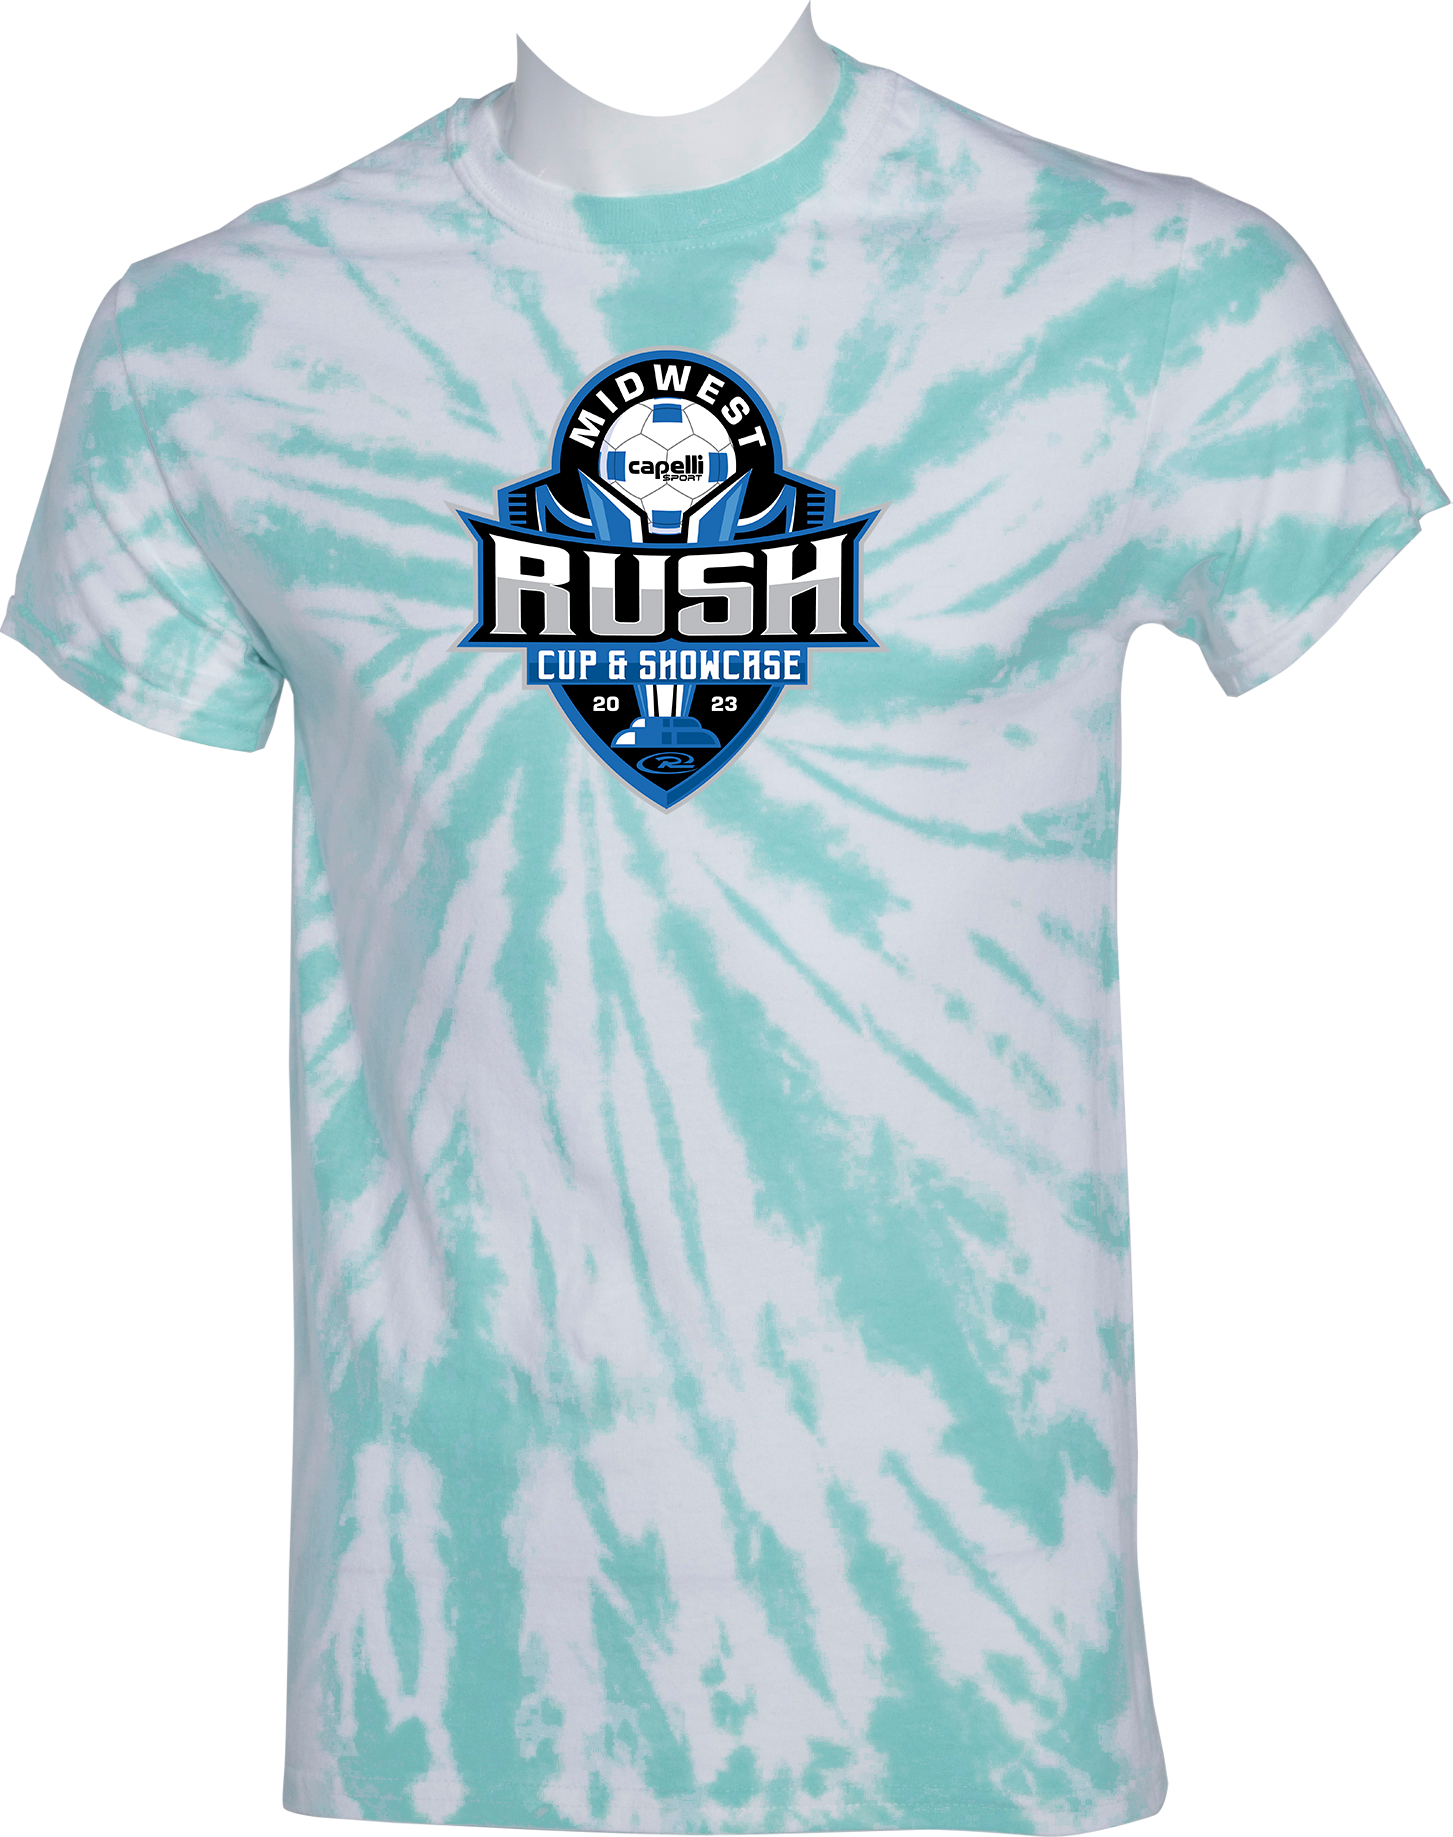 TIE-DYE SHORT SLEEVES - 2023 Midwest Rush Cup & Showcase